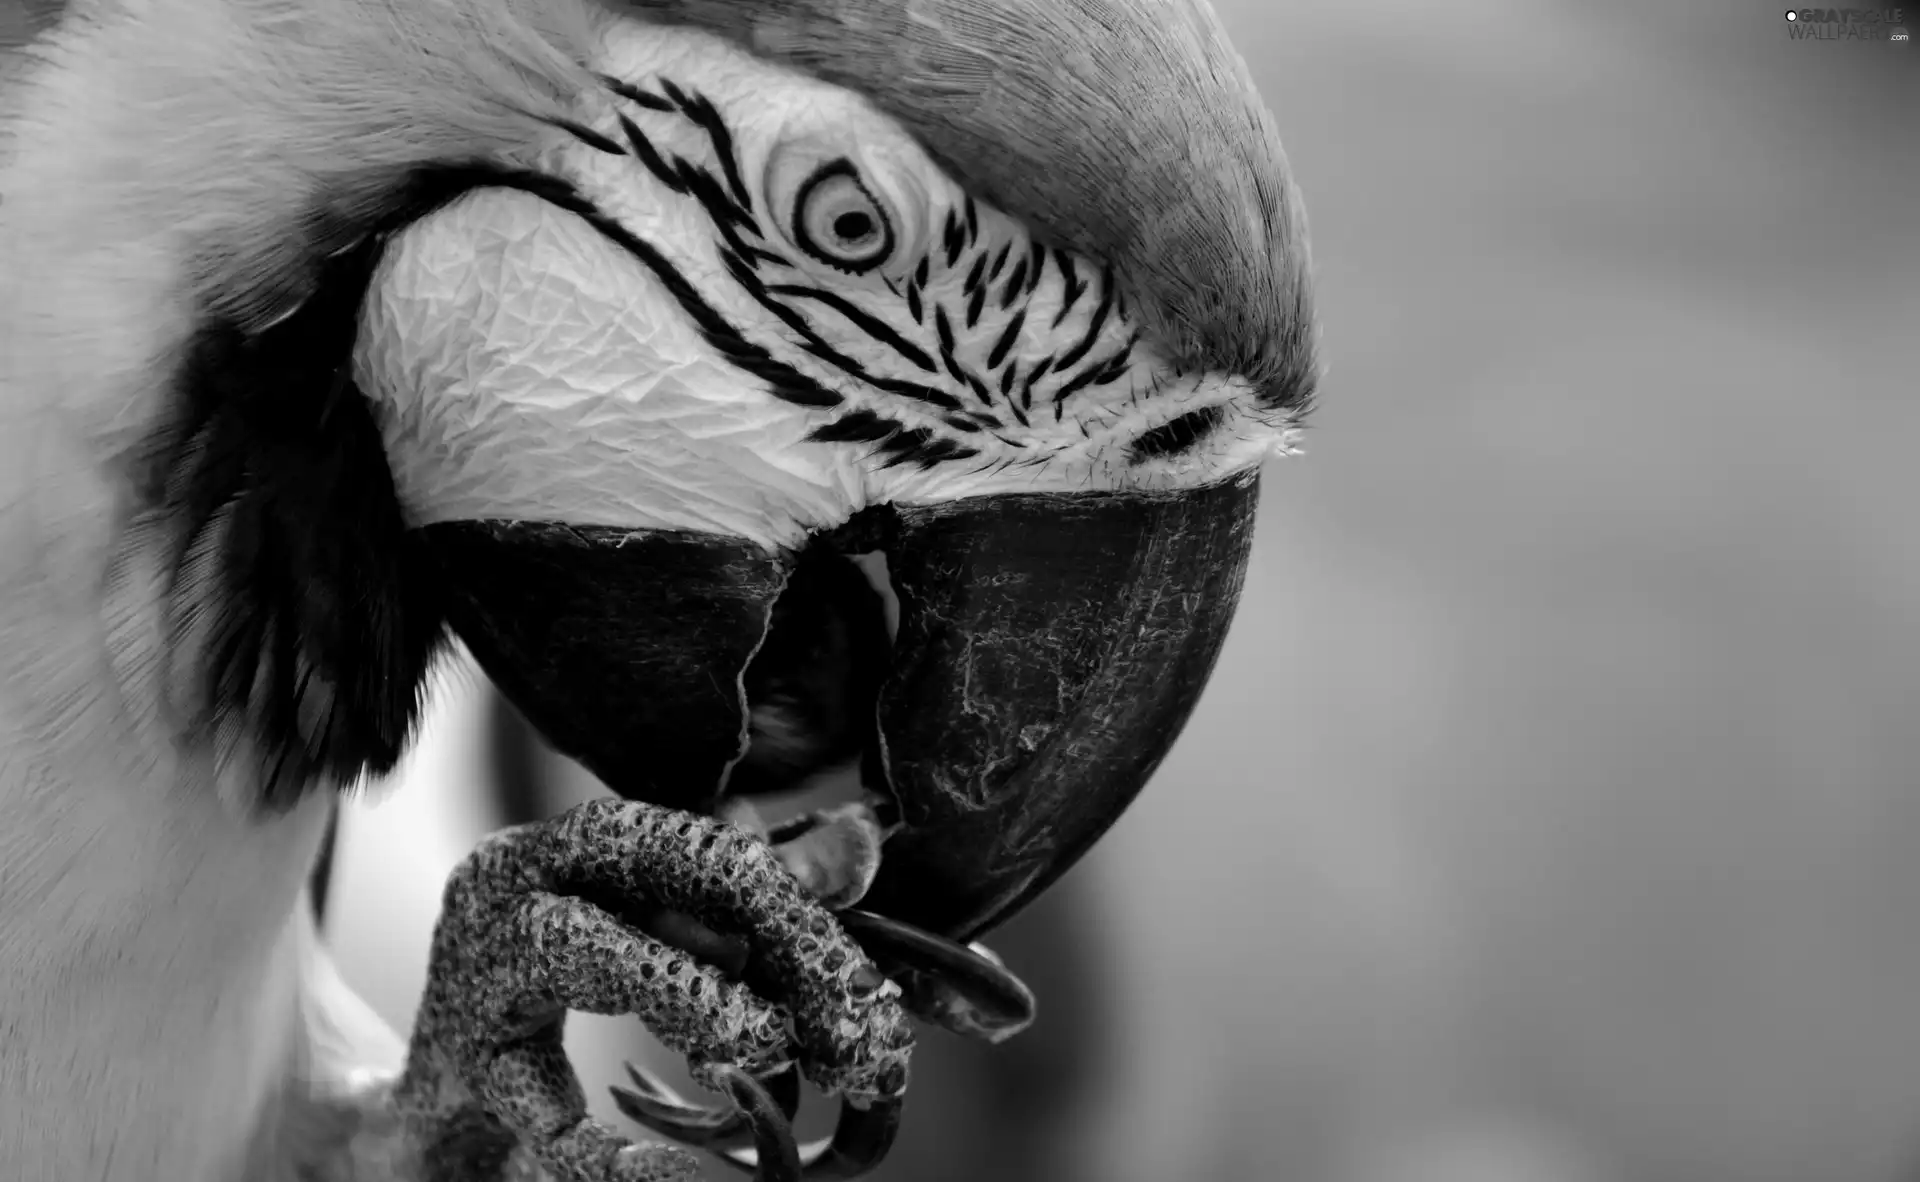 parrot, Nails, eye, nose